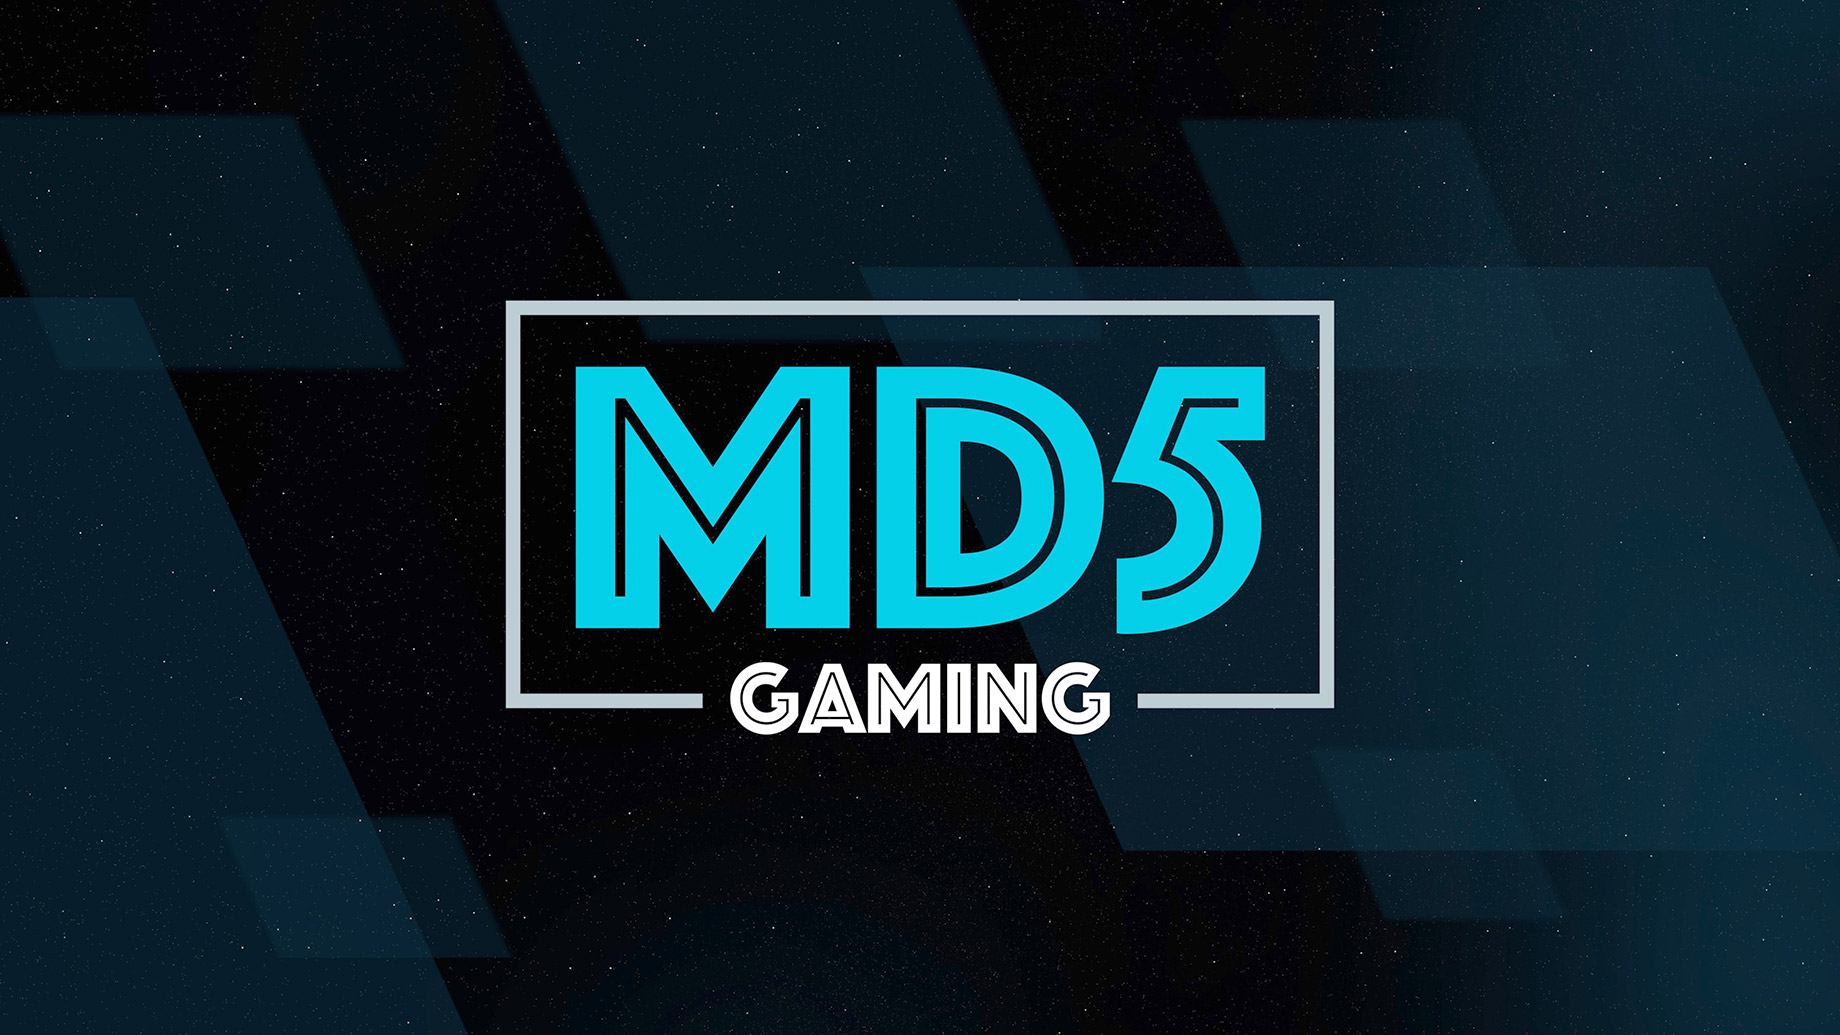 MD5 Gaming